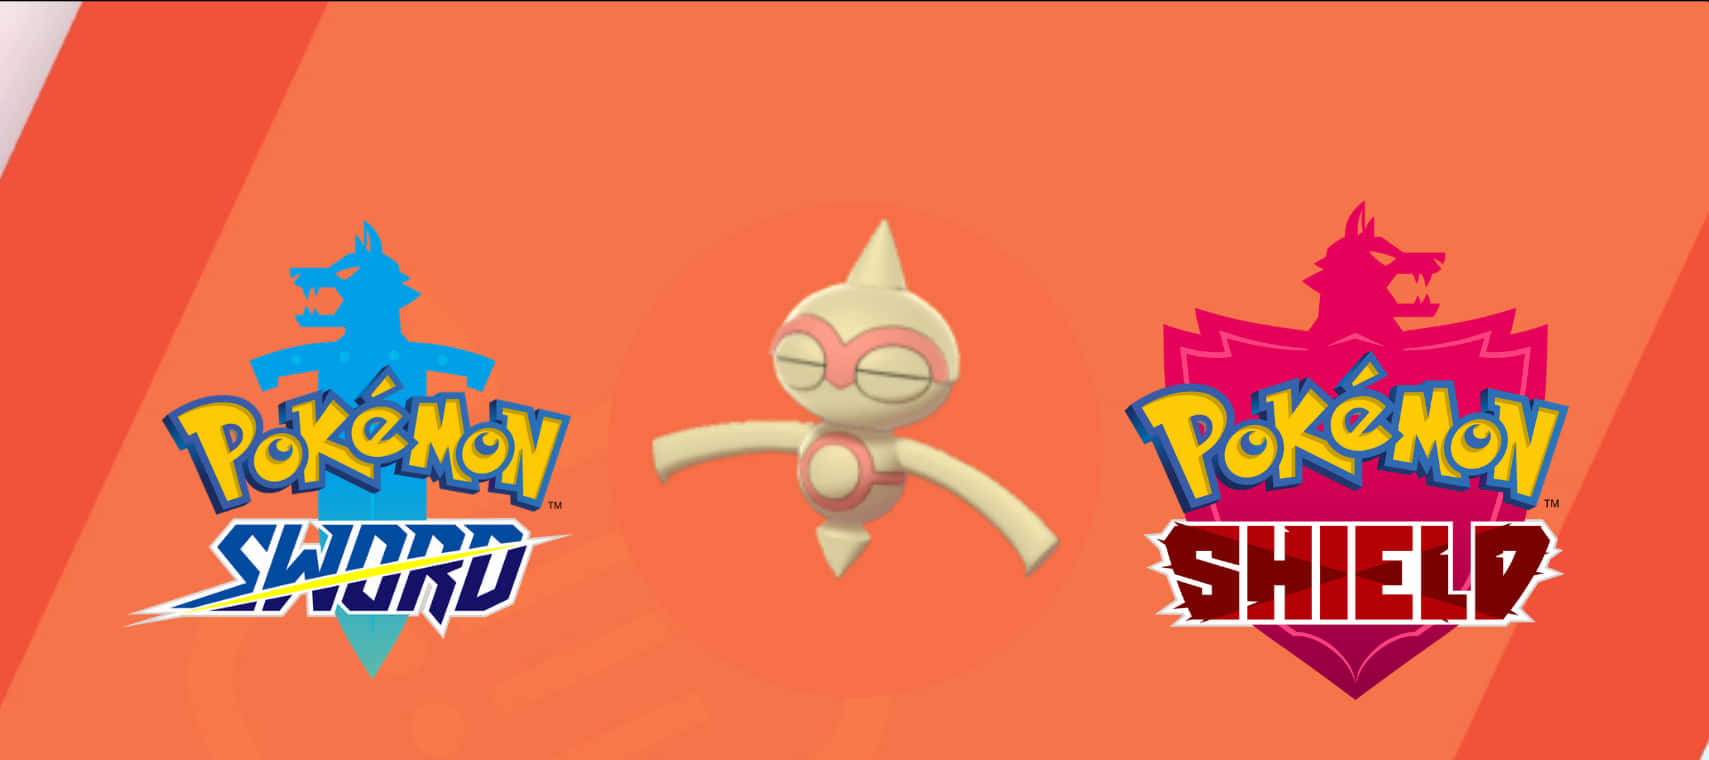 Baltoy - The Clay Doll Pokémon In Action Wallpaper